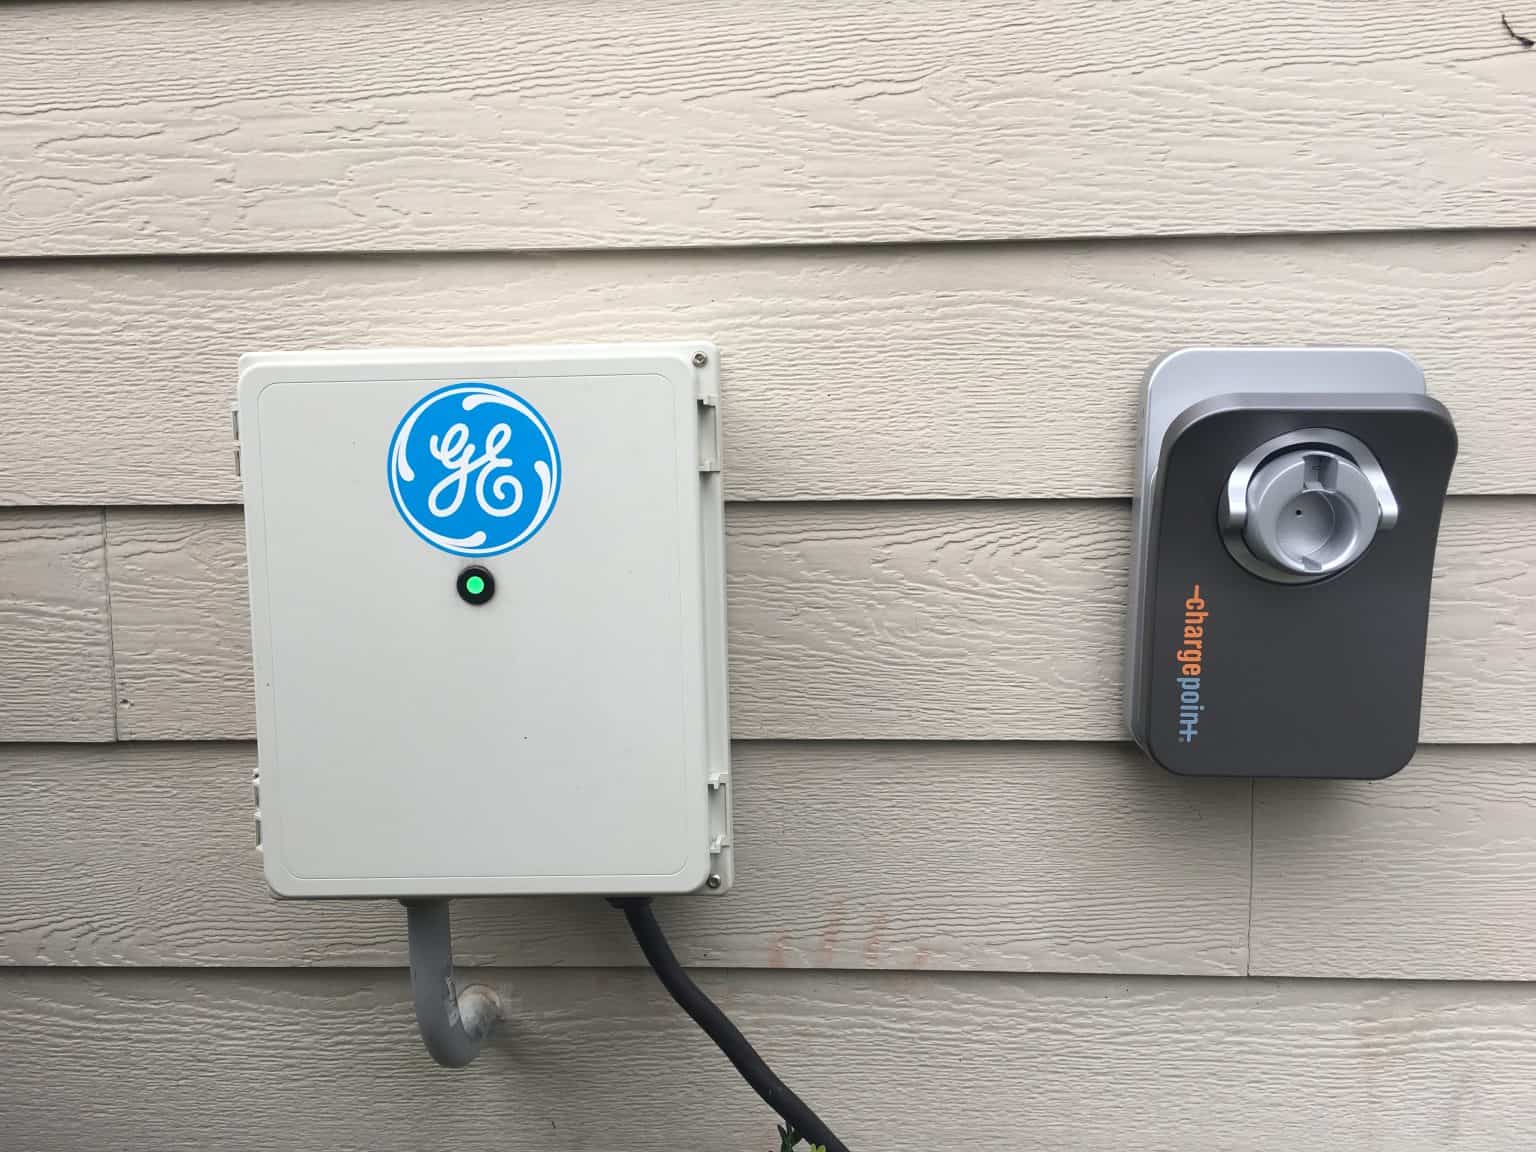 Install a ChargePoint Home Flex Home EV Charging Upgrade